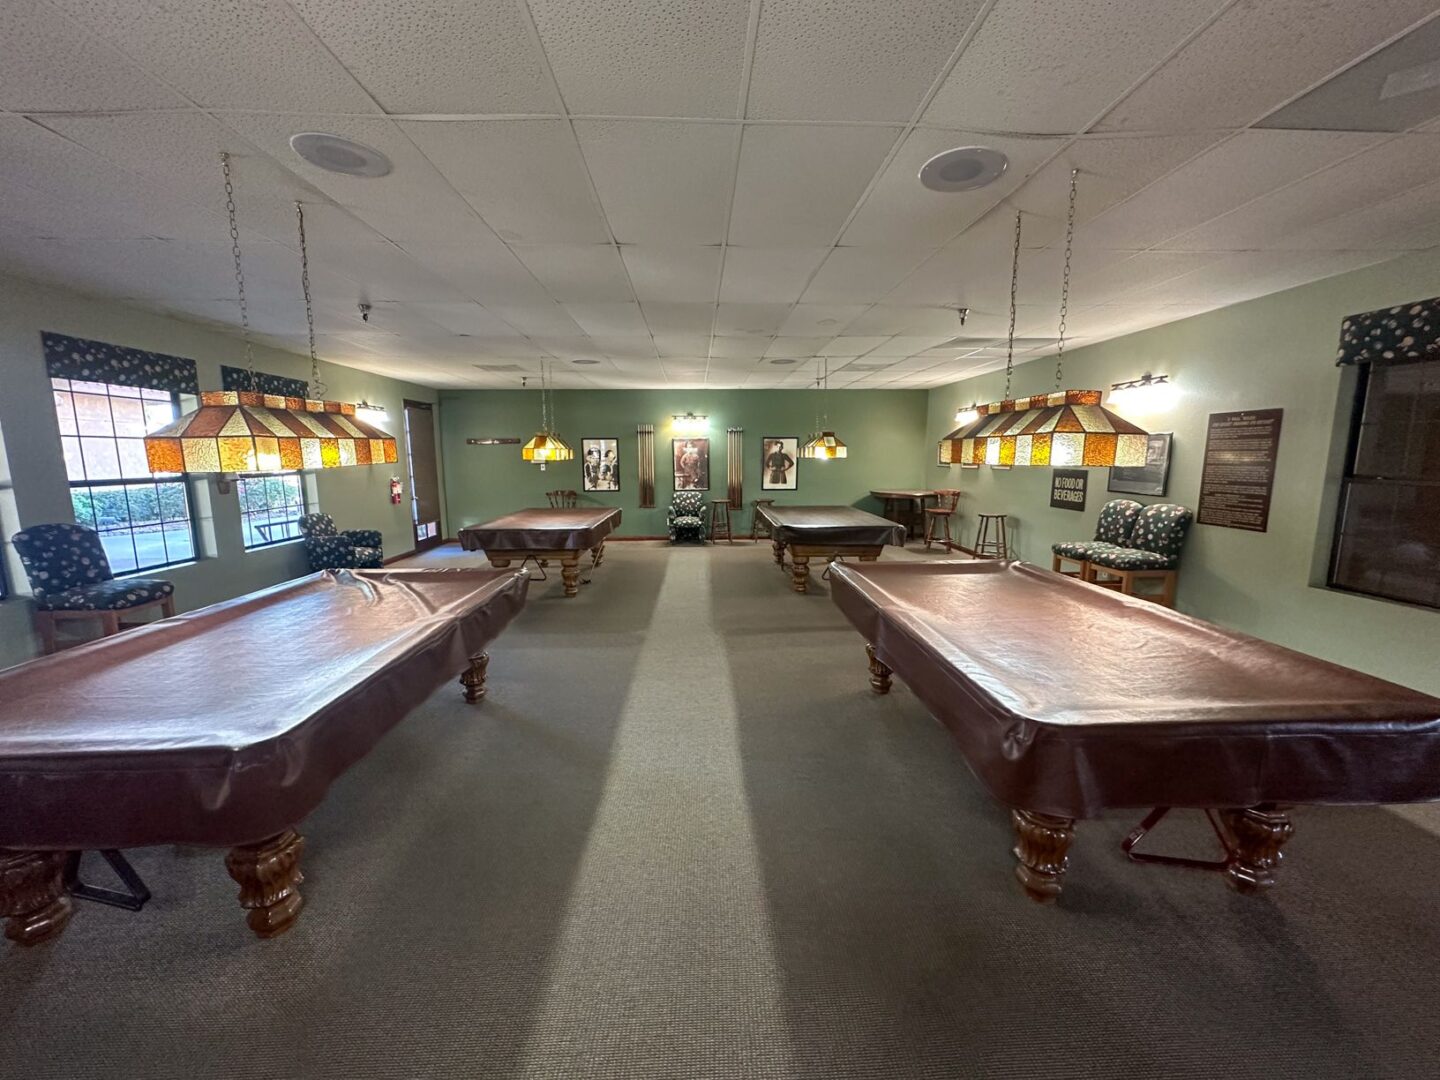 Pool tables in a large room.